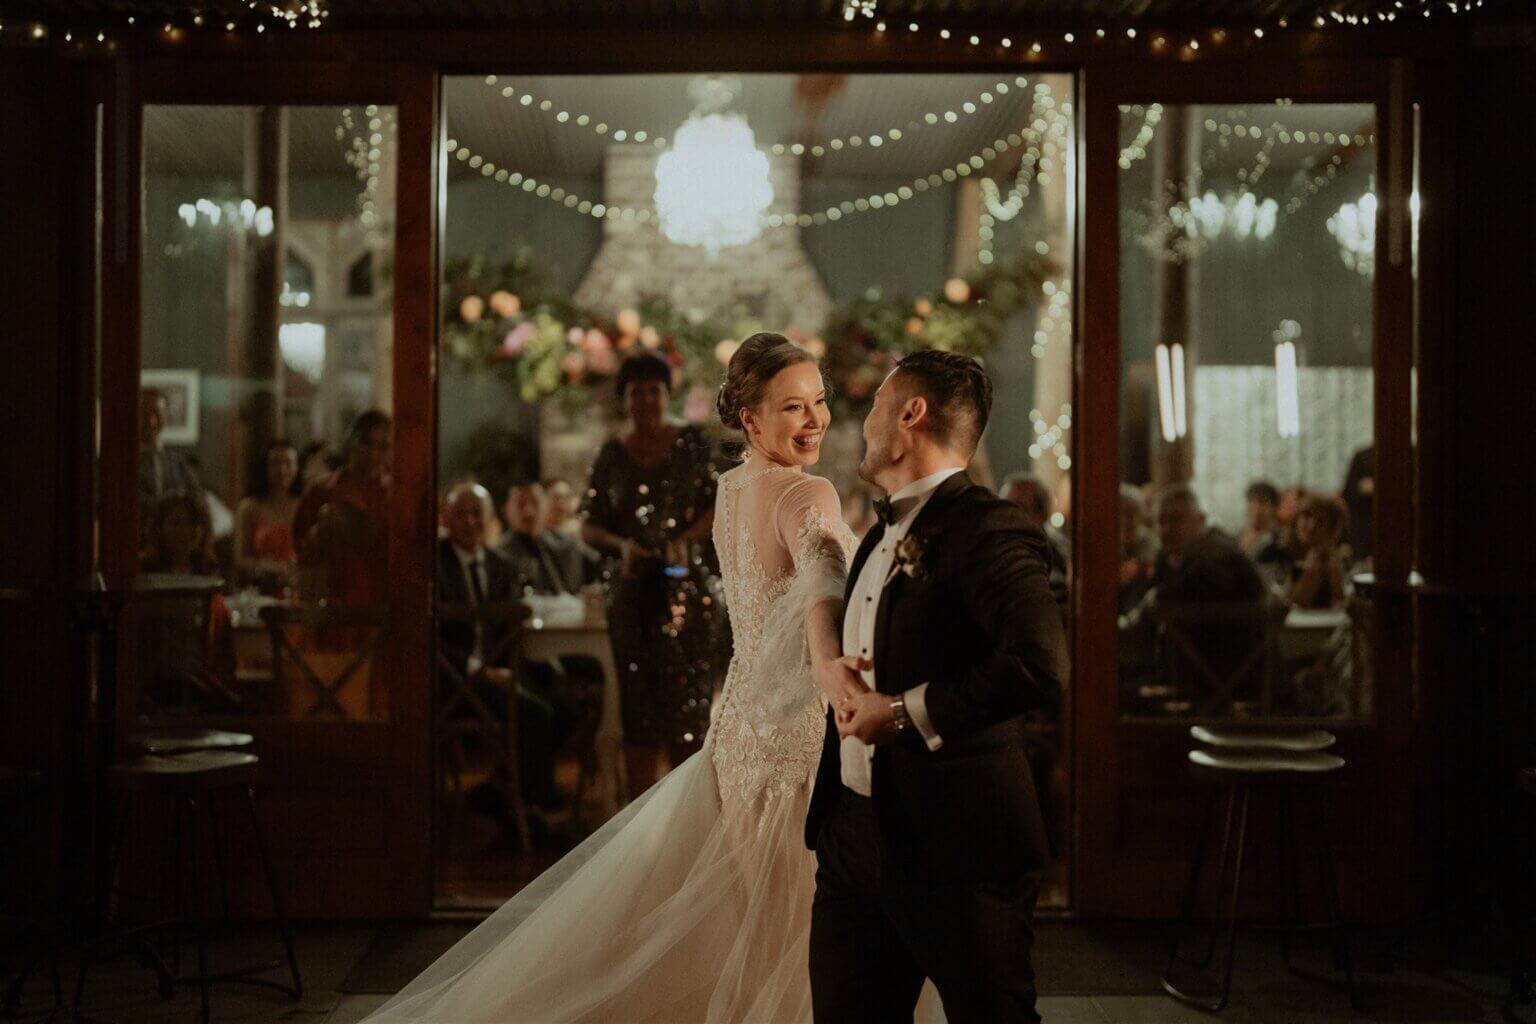 Newlyweds sharing their first dance in a rustic-chic venue with onlookers cheering, fairy lights twinkling in the background